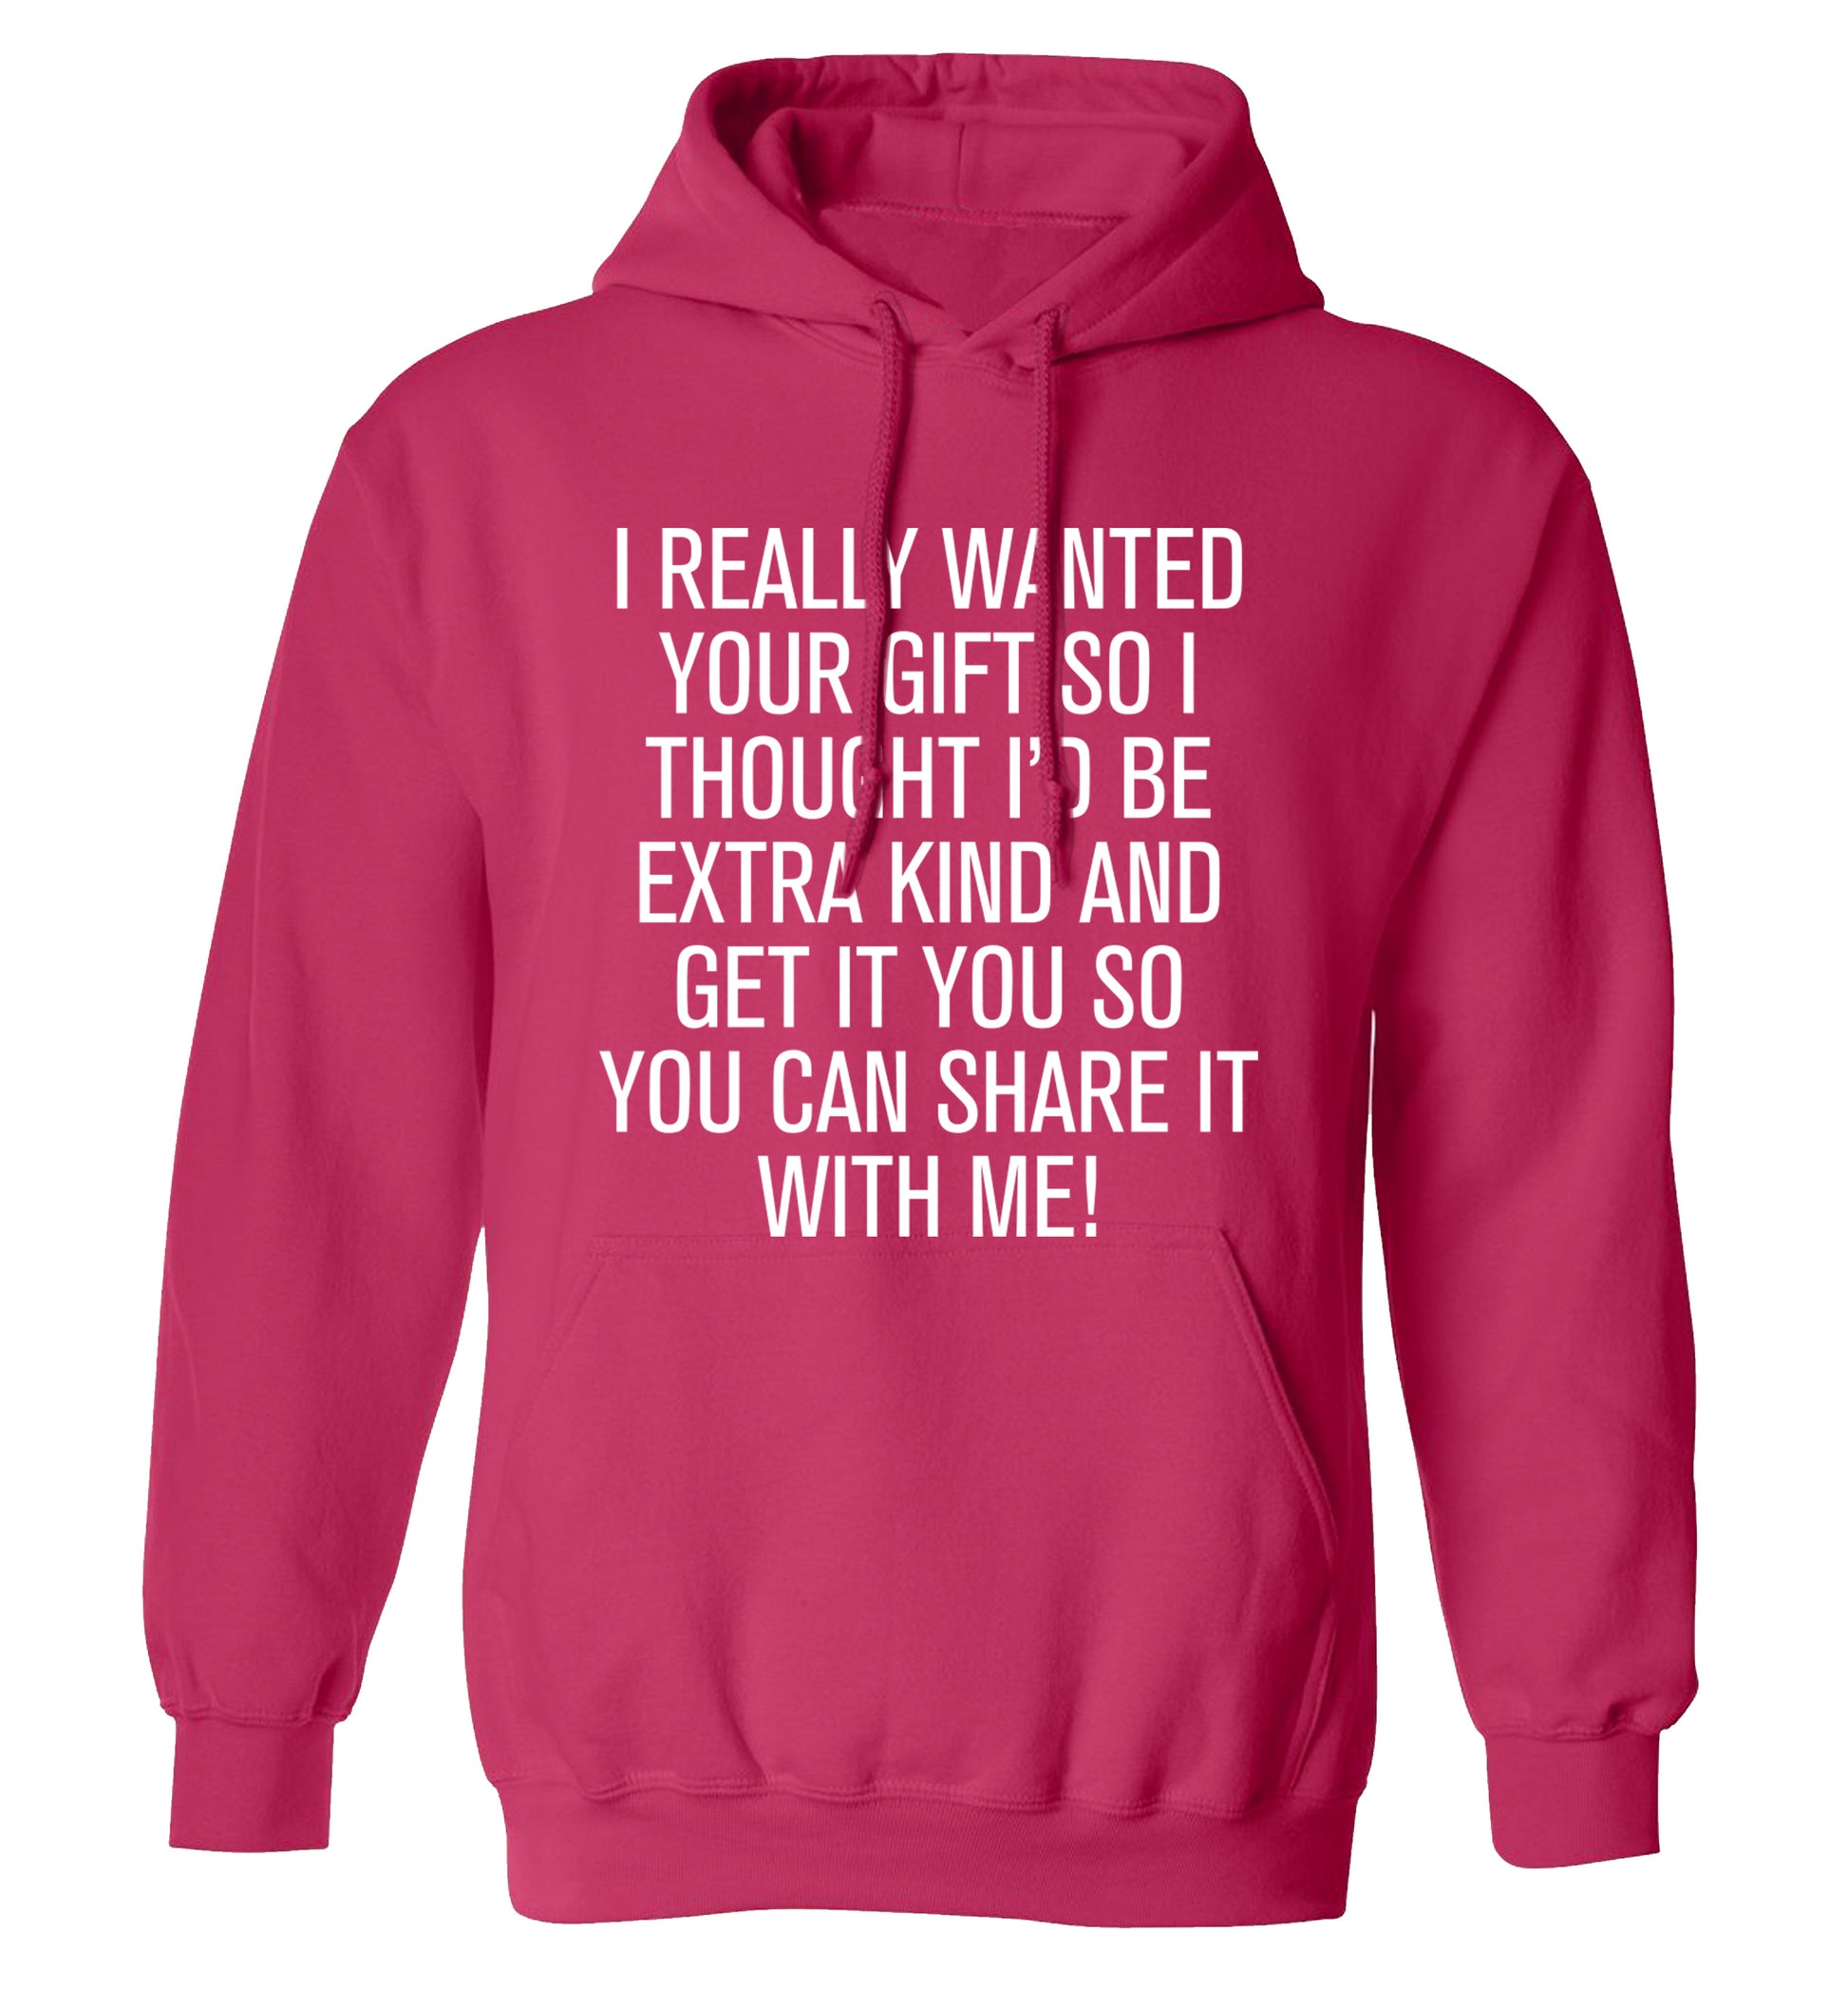 I really wanted your gift adults unisex pink hoodie 2XL